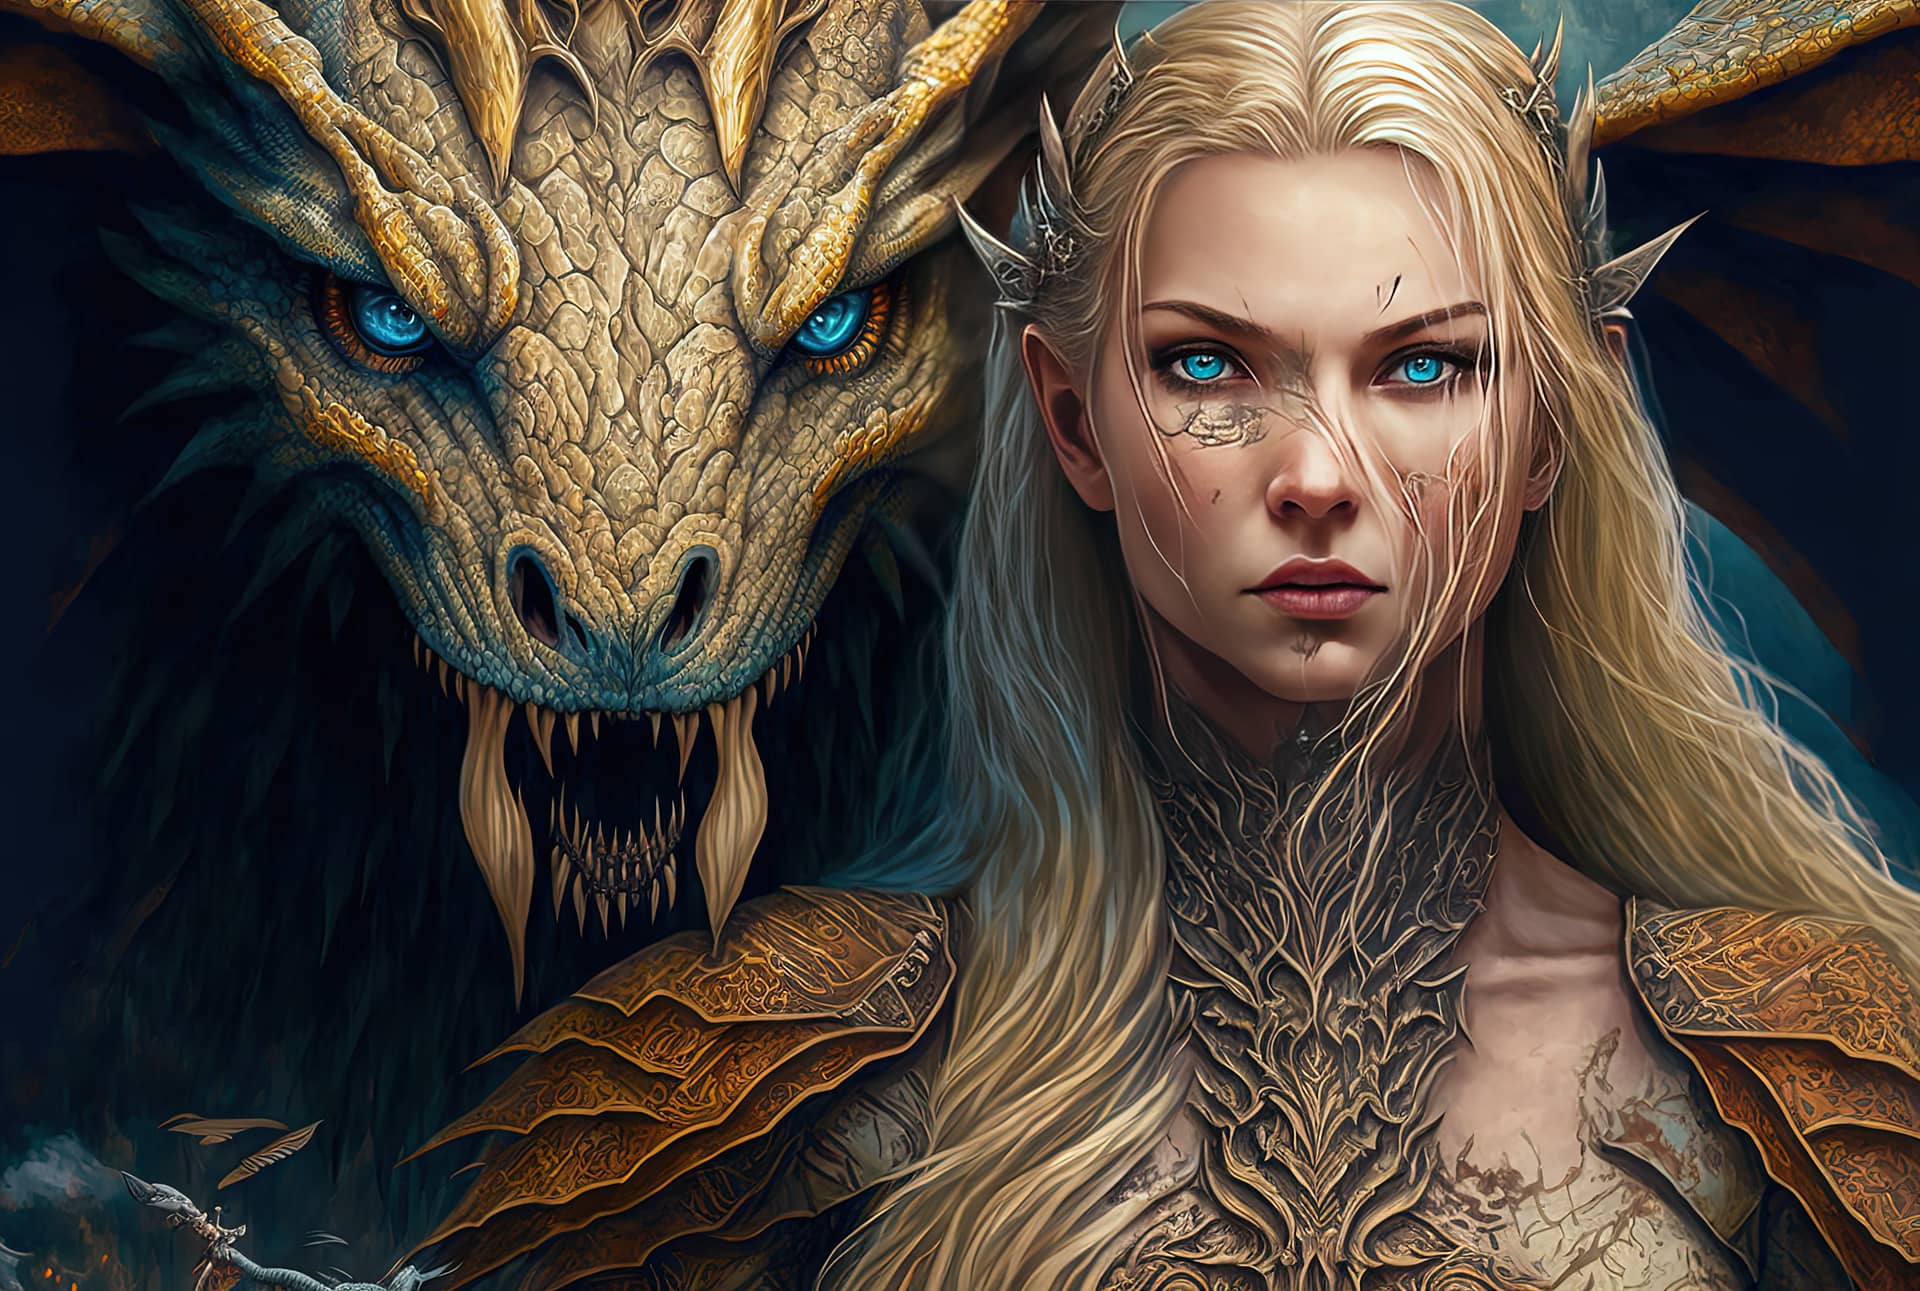 Cool images for profile with blond hair her dragon pet fantasy creature